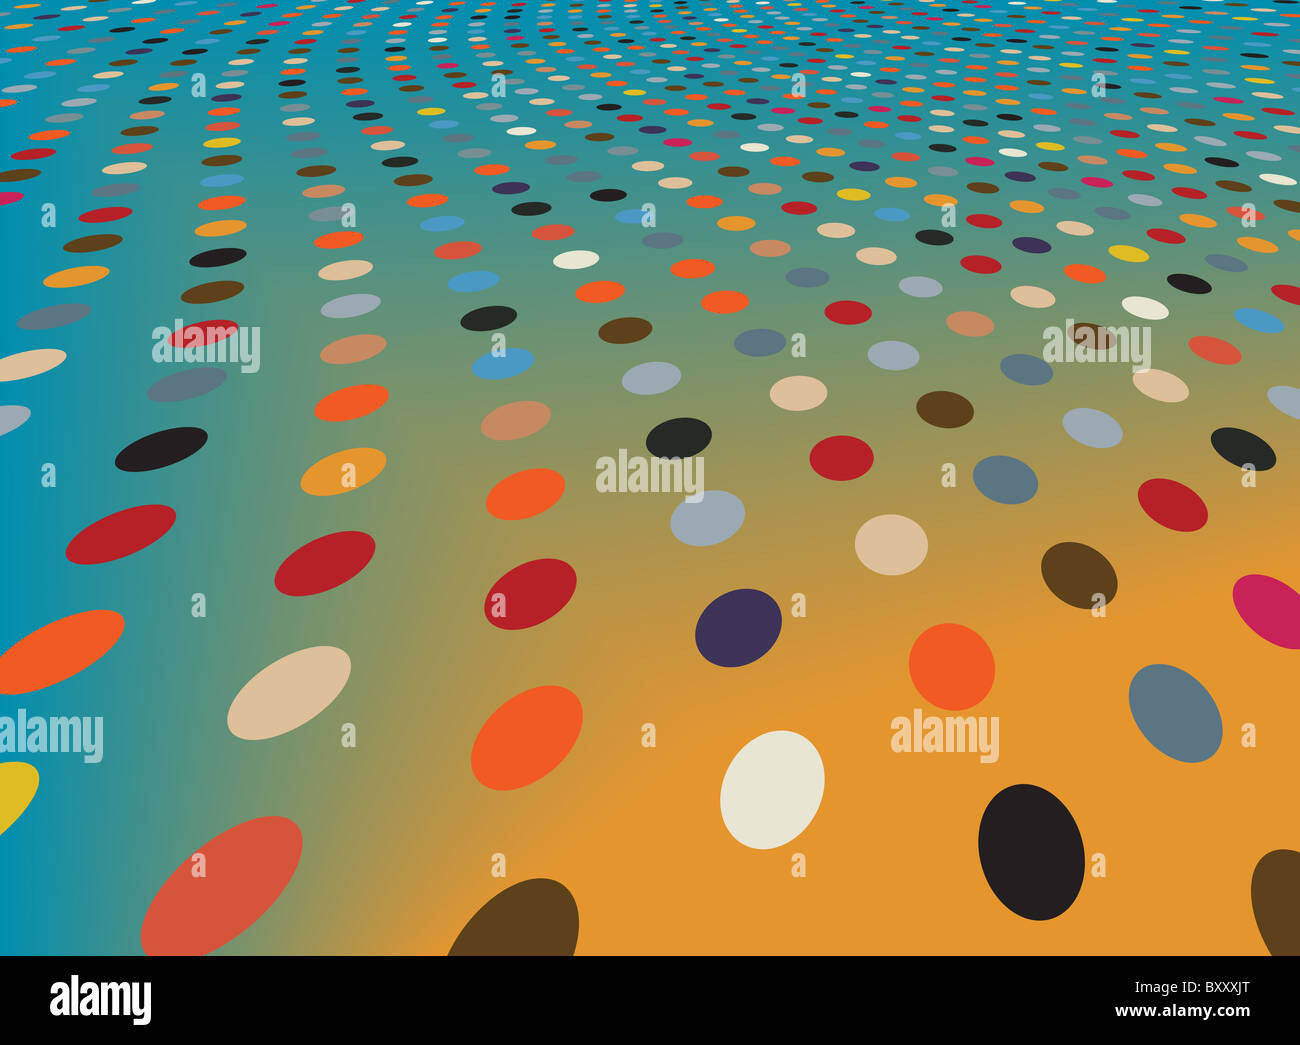 Colorful abstract illustrated design of dots Stock Photo